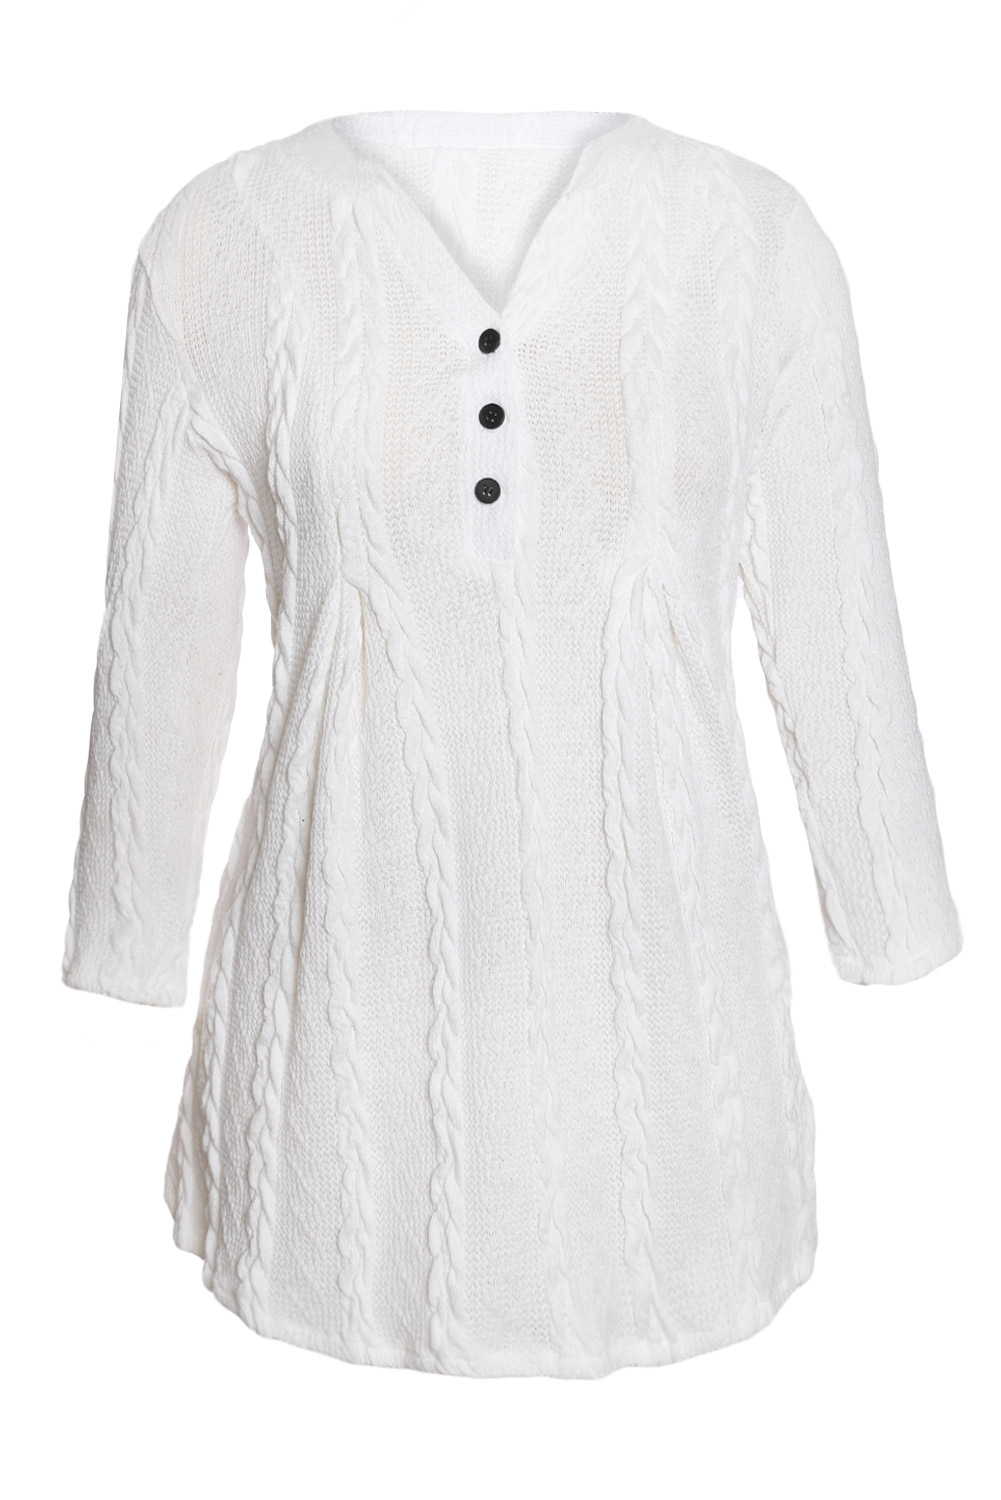 Trendy White Cable Knit Button Neck Swingy Tunic